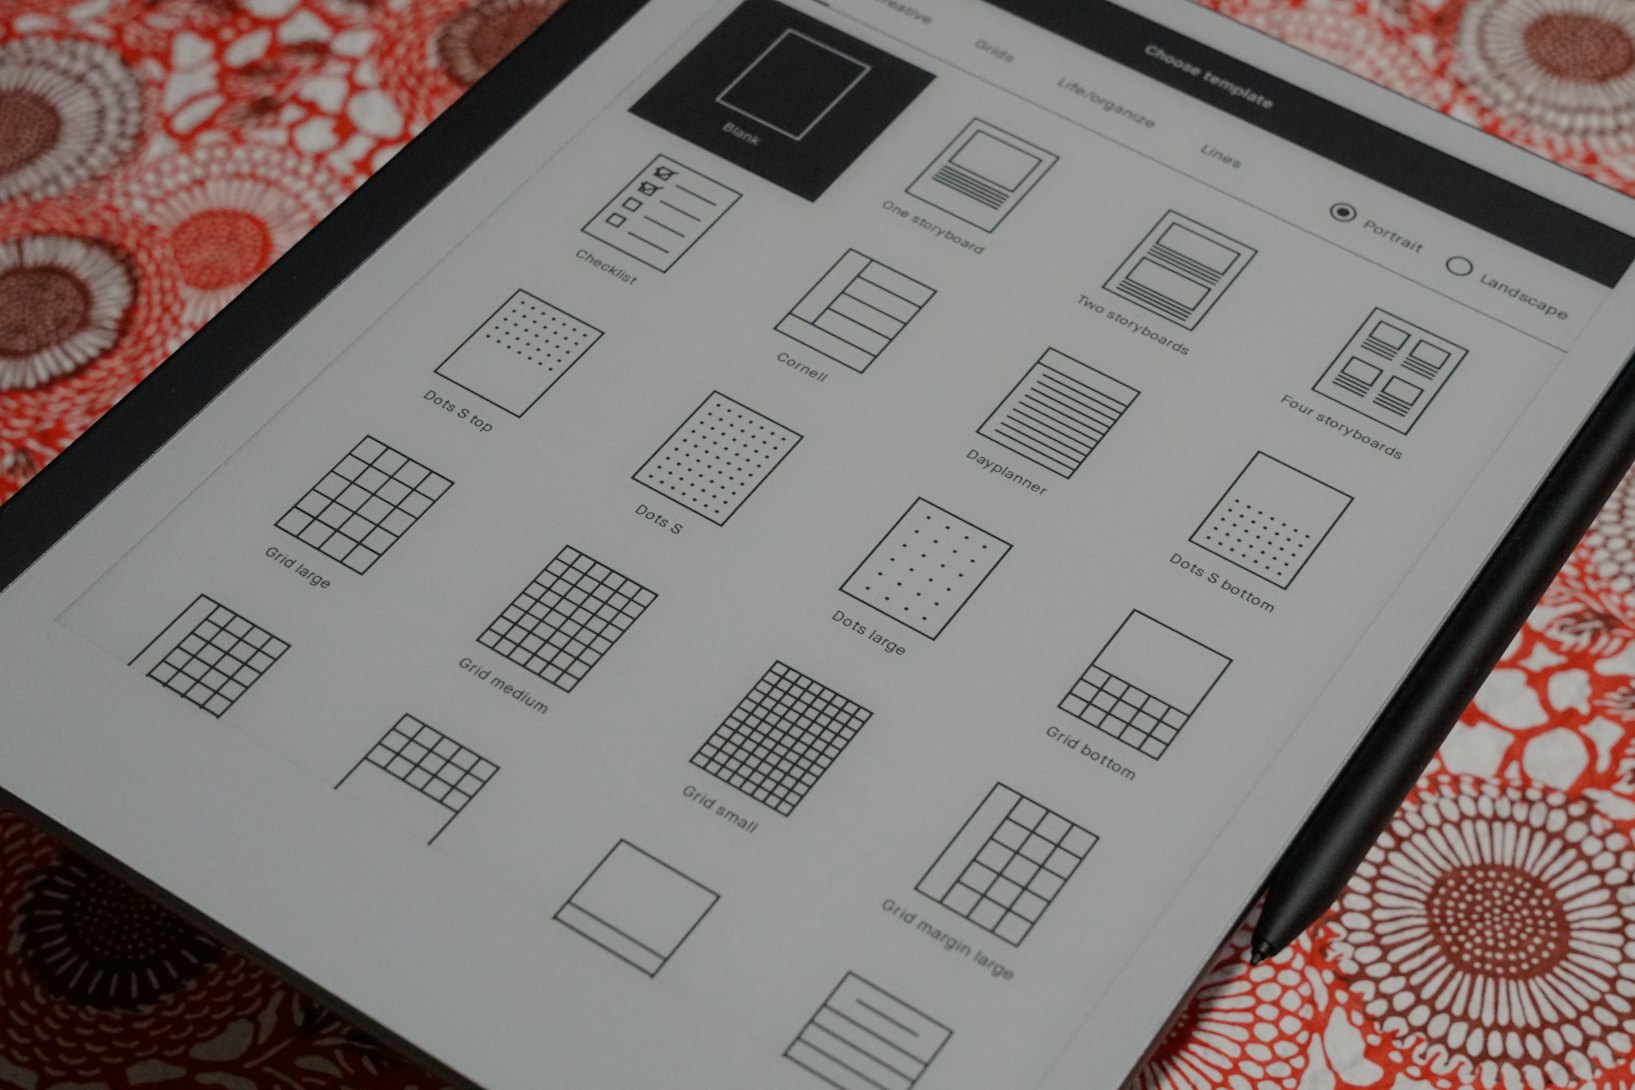 reMarkable 2 paper tablet review - Can it replace your paper notes? - The  Gadgeteer